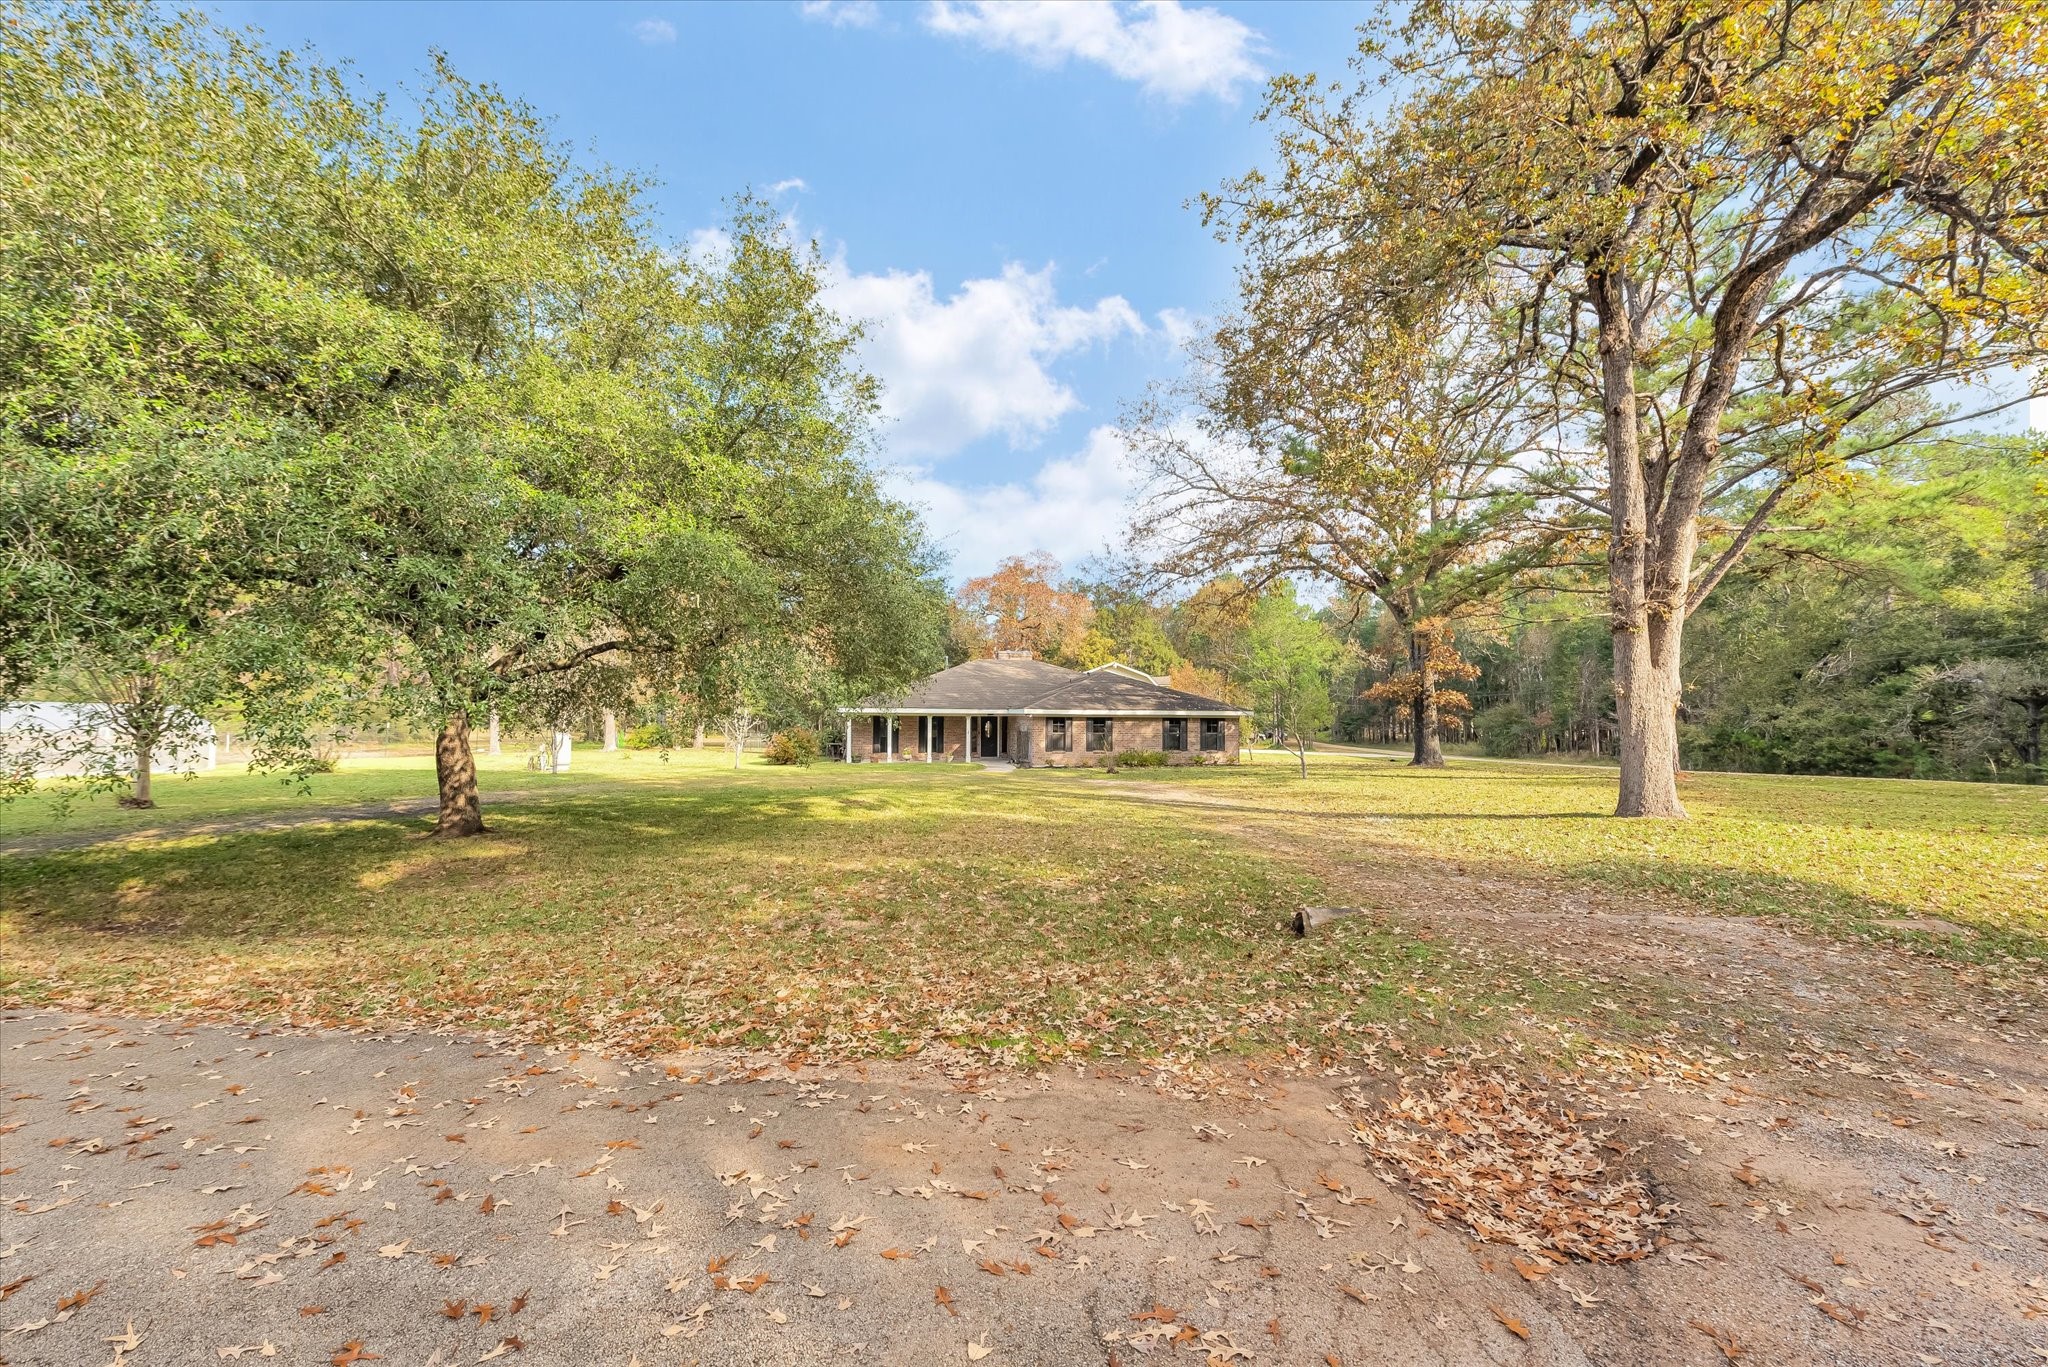 Over 2.5 Acres in a Park Like Setting.  This one won't wait. Raising a family?  Need more Elbow Room?  Available for Immediate move-in.  Restrictions are for residential purposes.